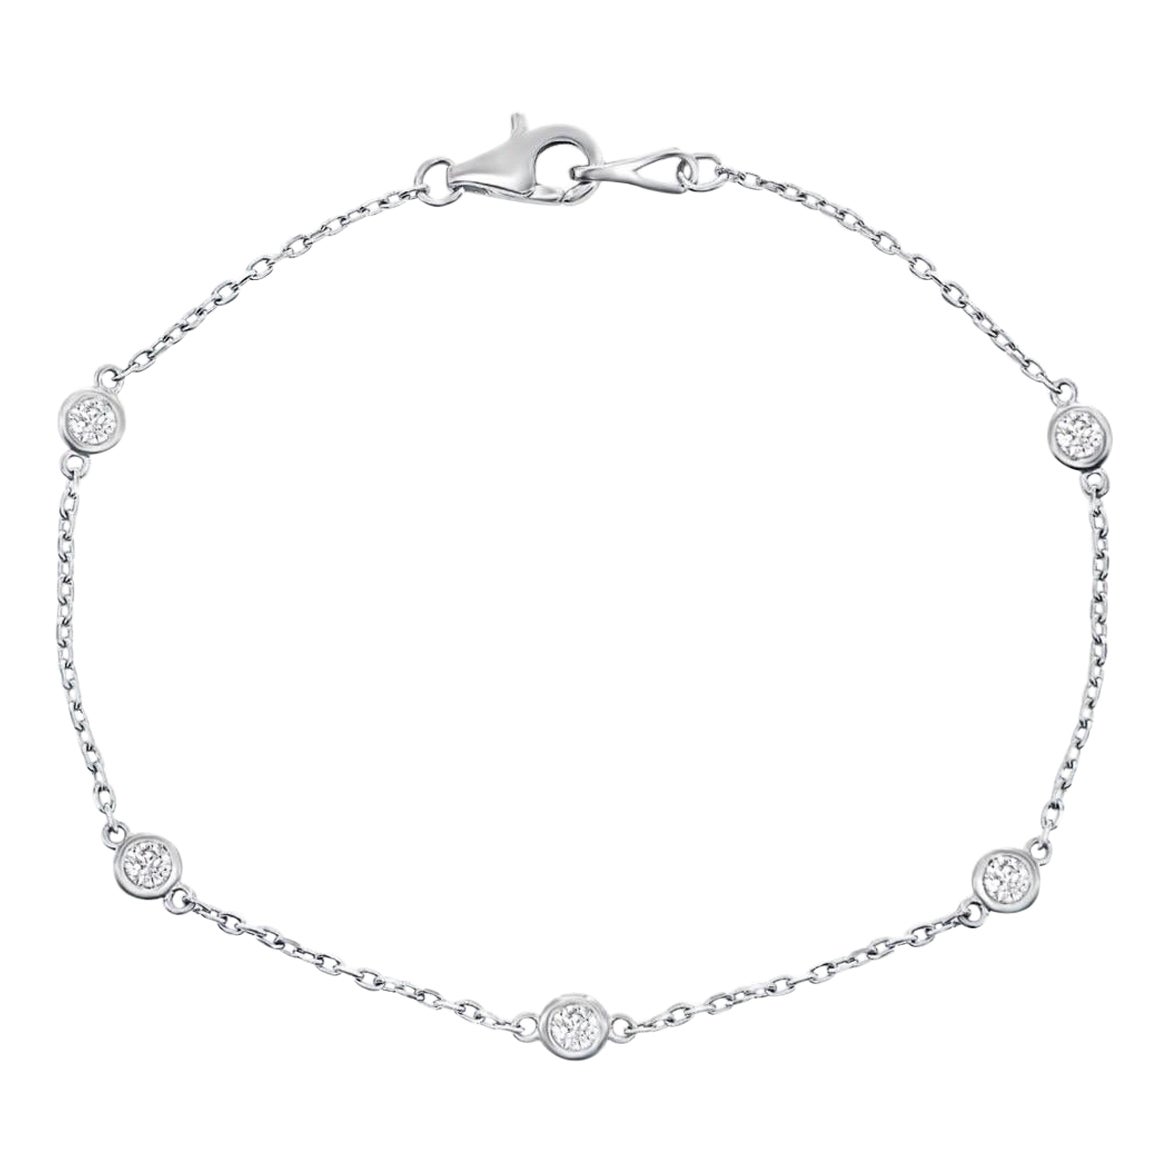 Diamond By The Yards Bracelet in 14k White Gold With 5 Natural Diamonds